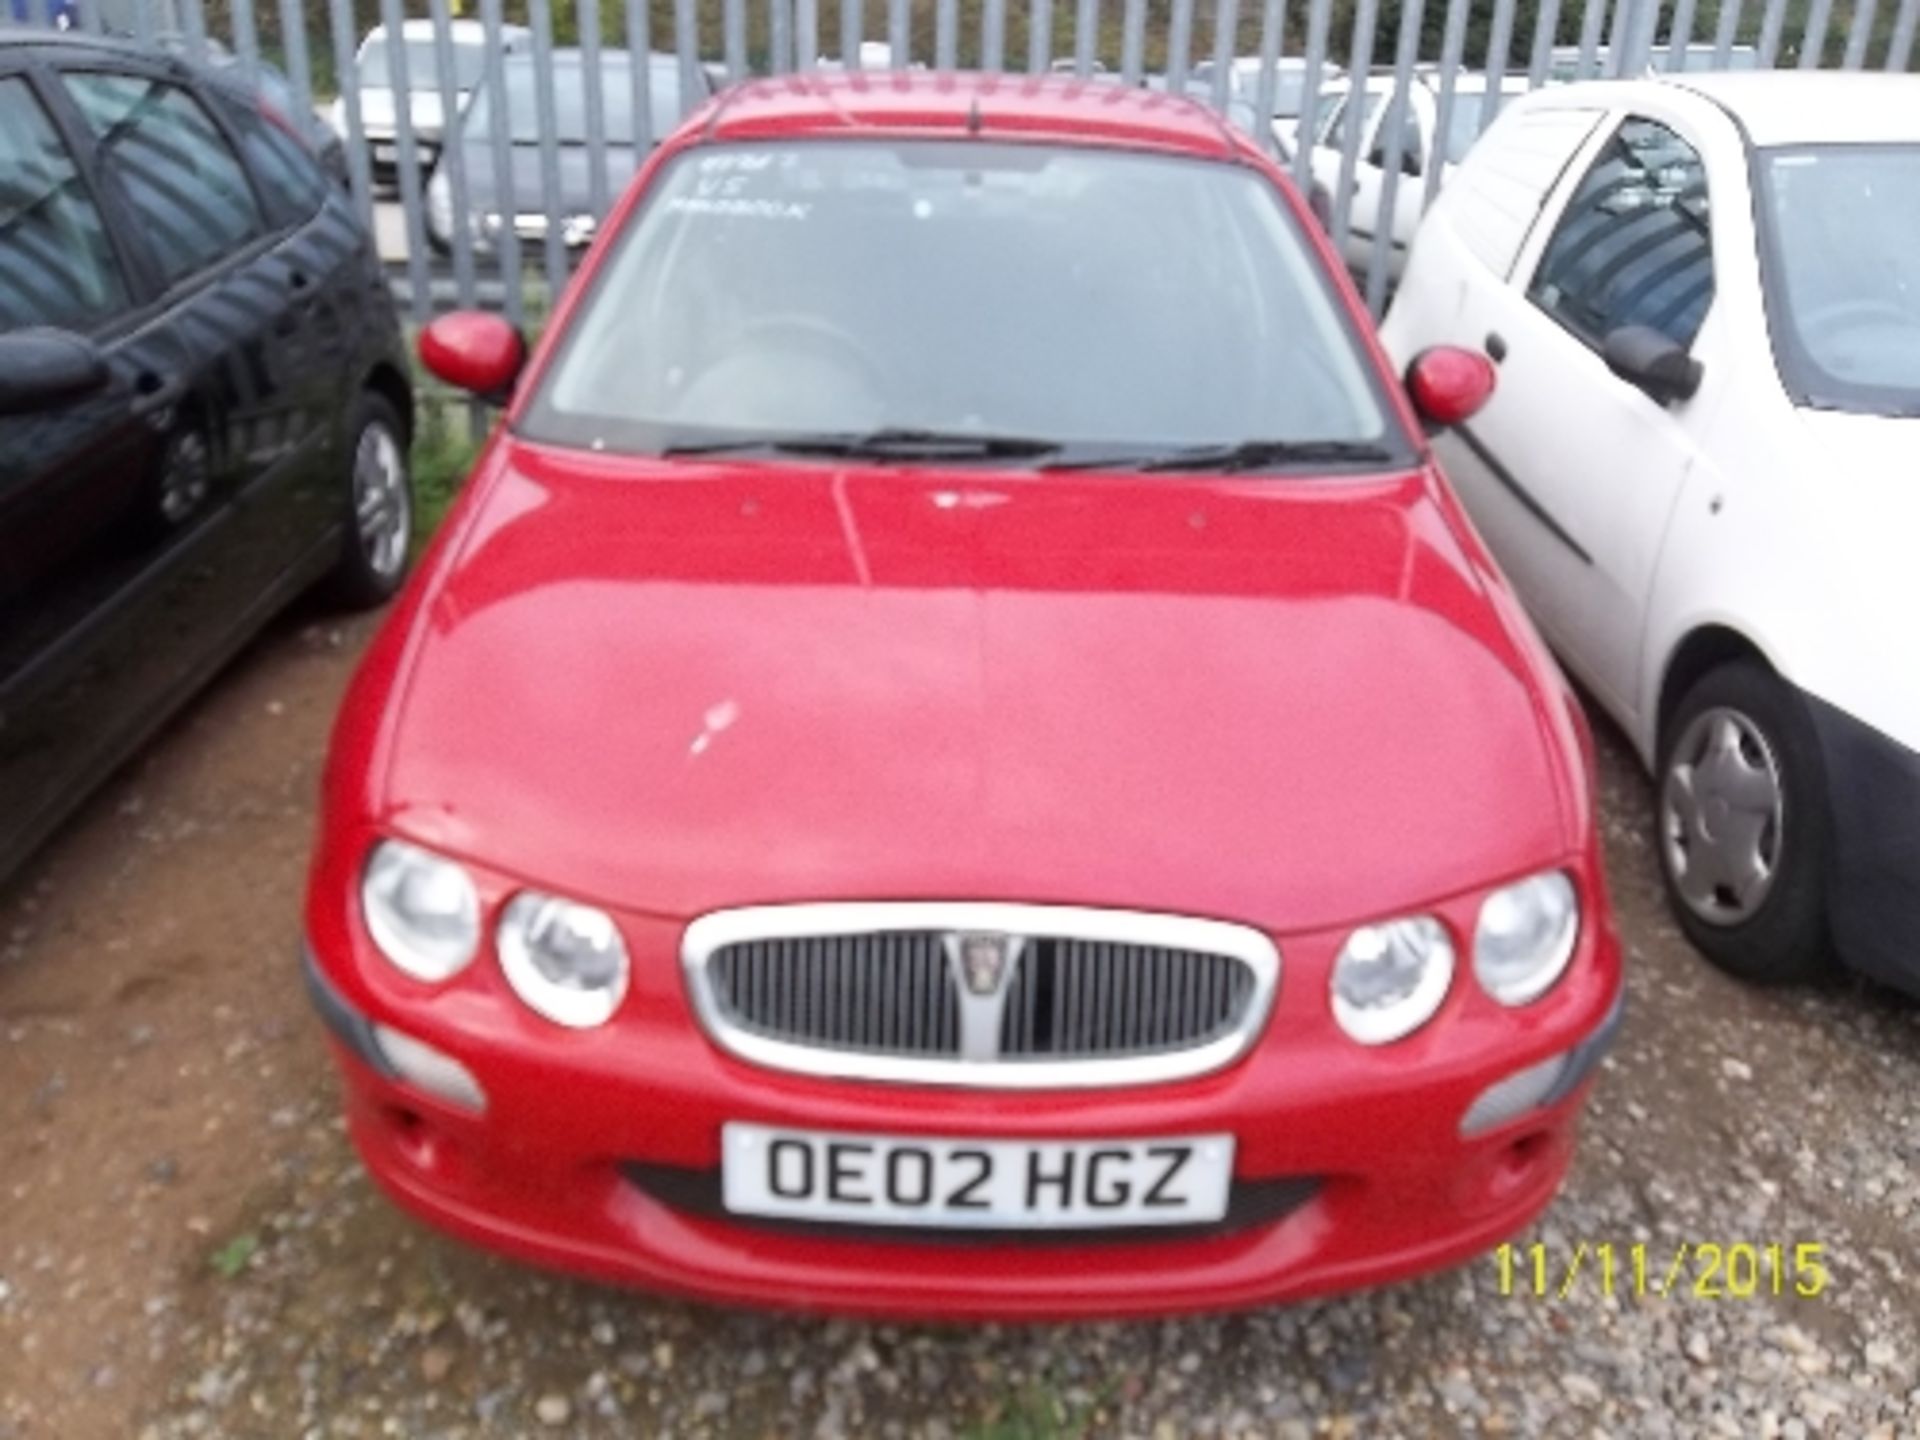 Rover 25 Impression S2 - OE02 HGZ This vehicle may be purchased only by the holder of an ATF